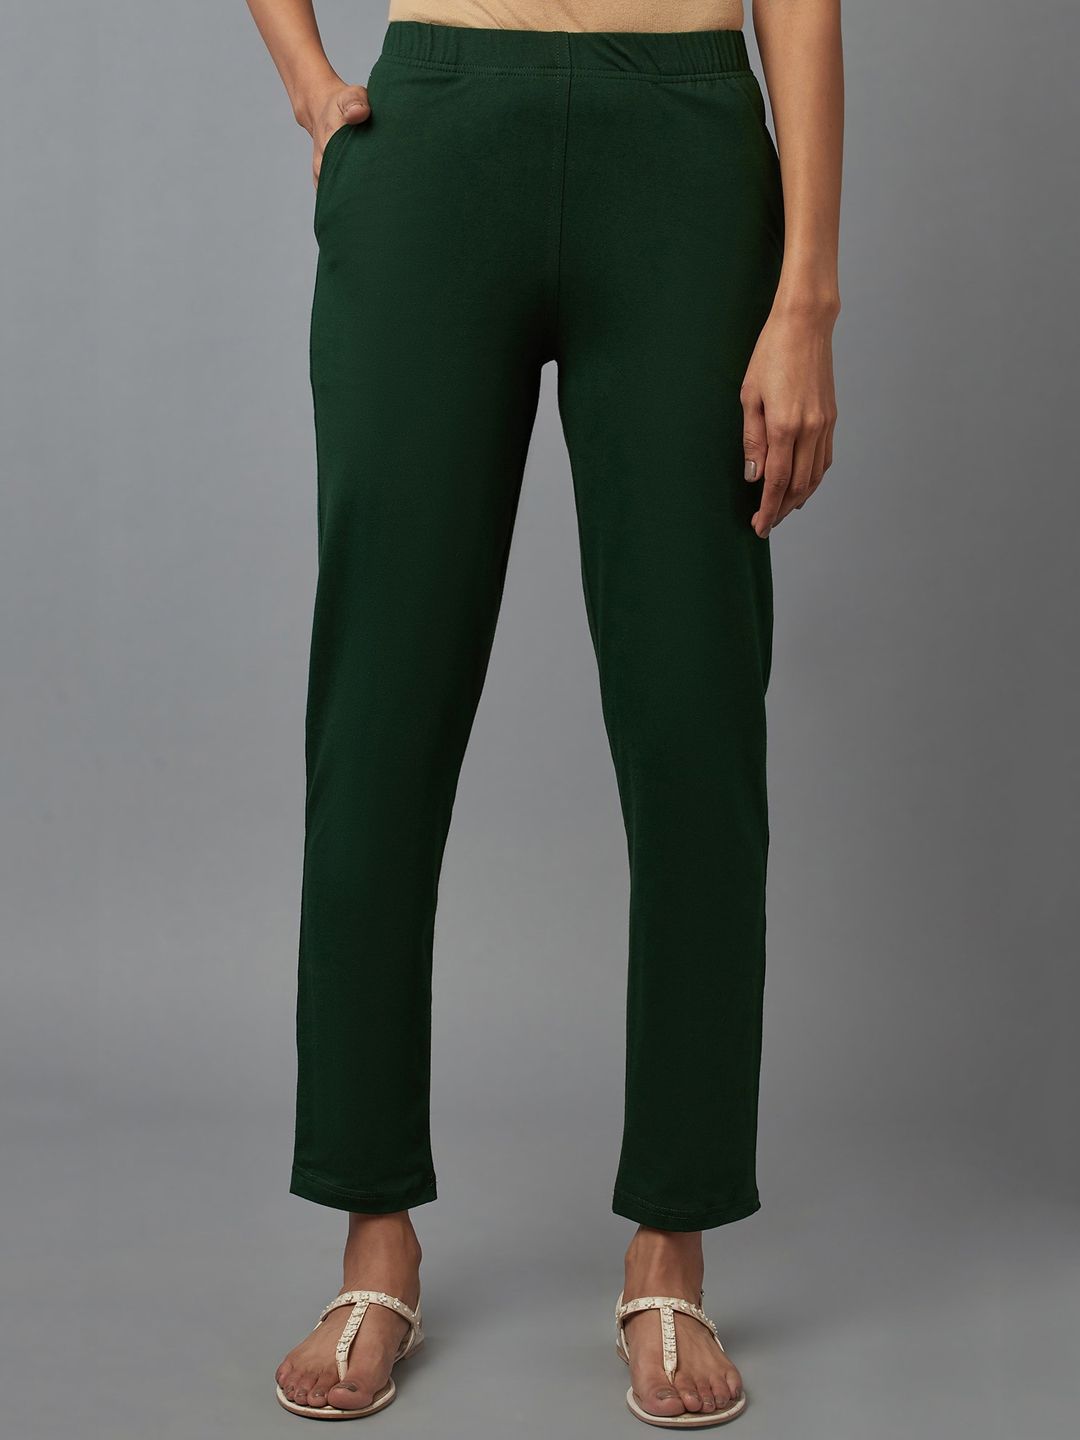 elleven Woman Green Trousers Price in India